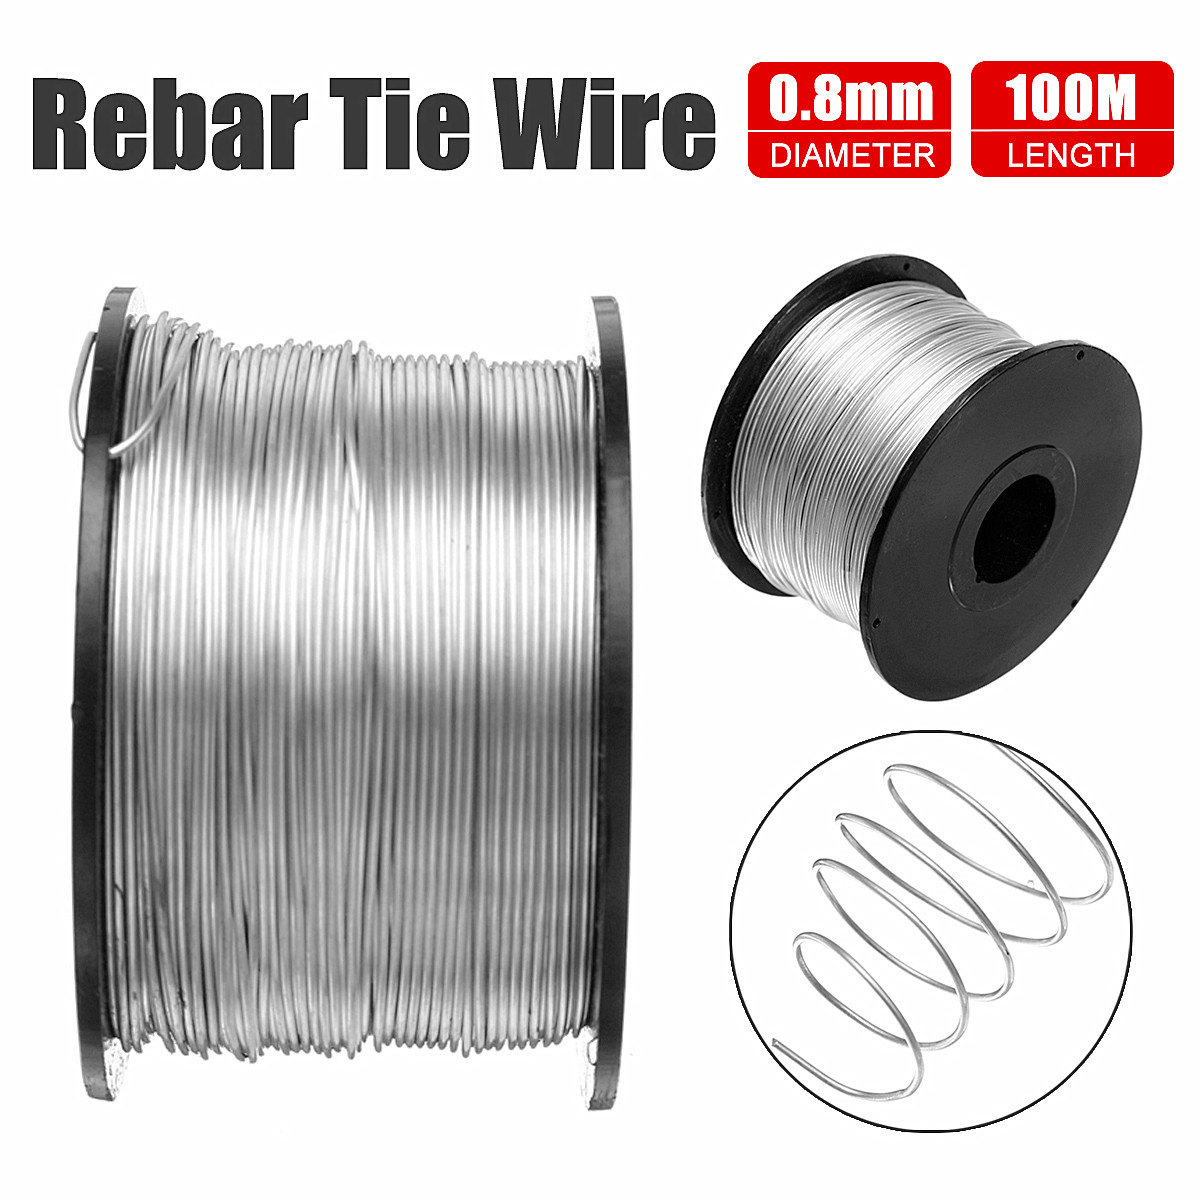 110M-08mm-Rebar-Tie-Wire-Coil-For-Automatic-Rebar-Tying-Machine-1306486-2